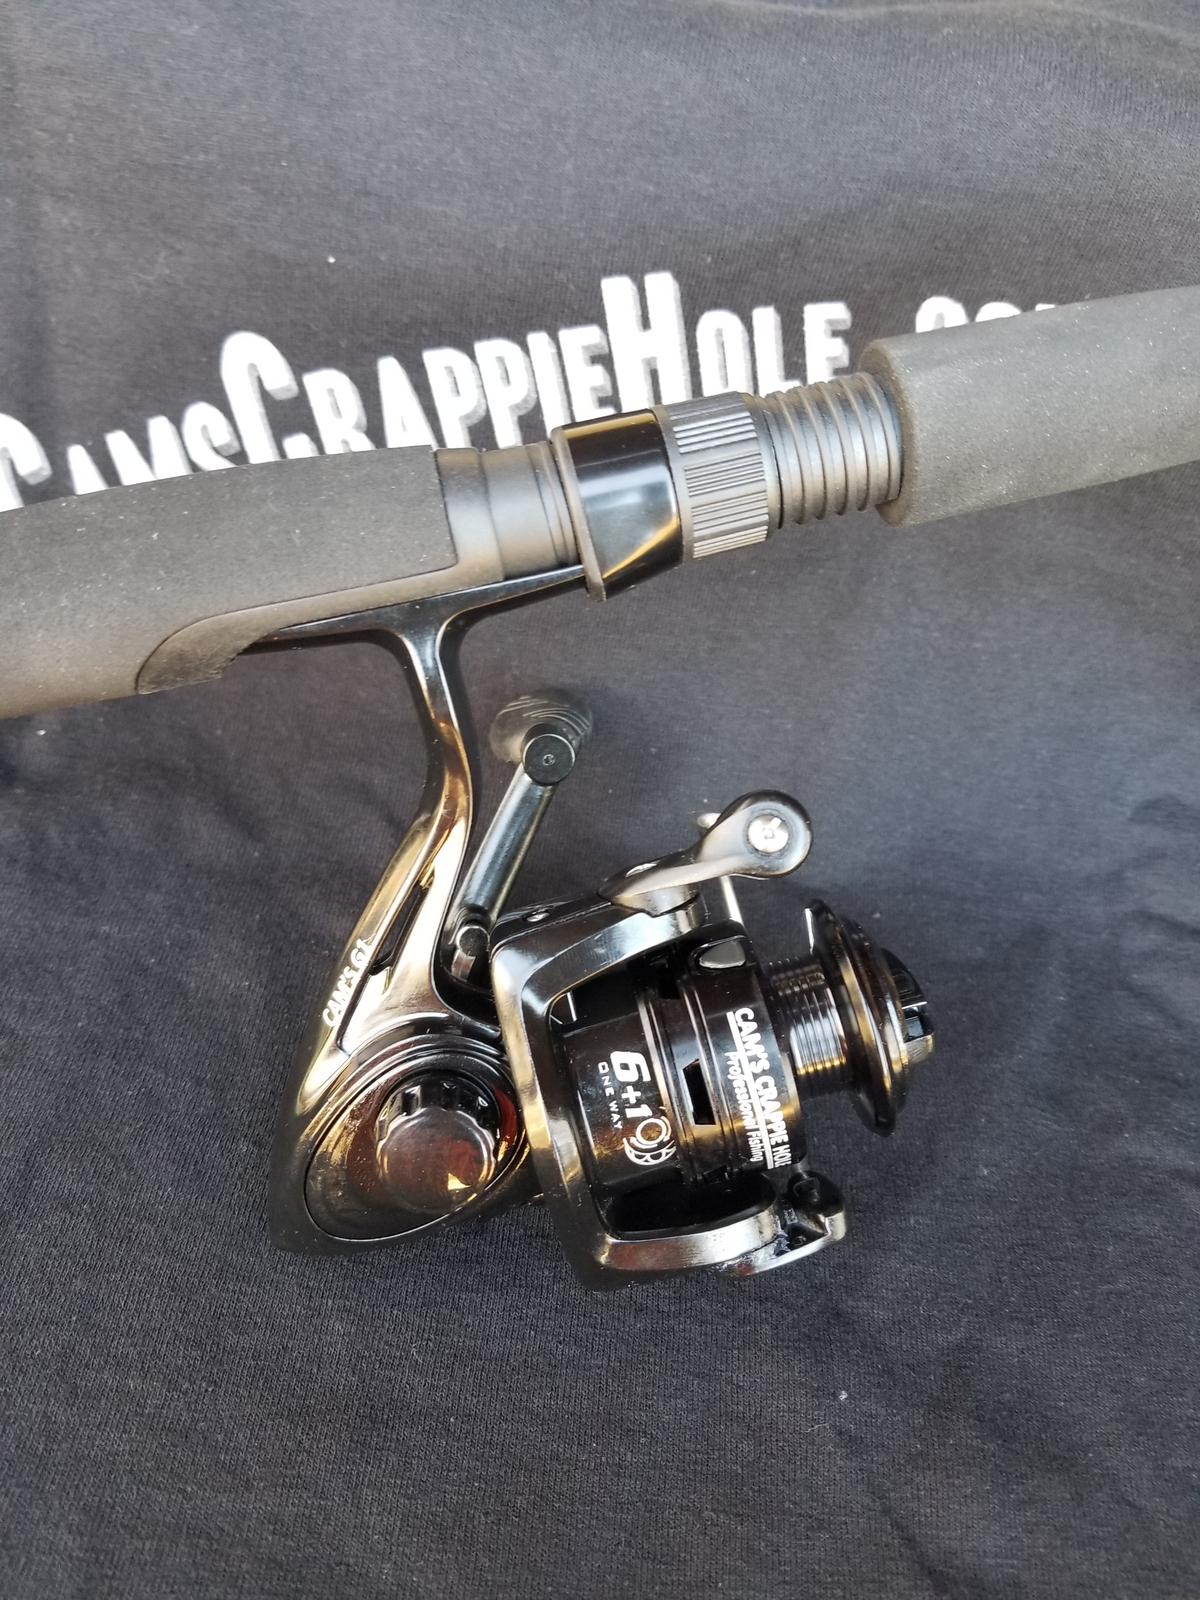 Cam's 7(BB)The Raven [BlackBird] Xtralite 6 ft. Rod & Reel Spinning Co –  Cam's CRAPPIE HOLE TACKLE & APPAREL